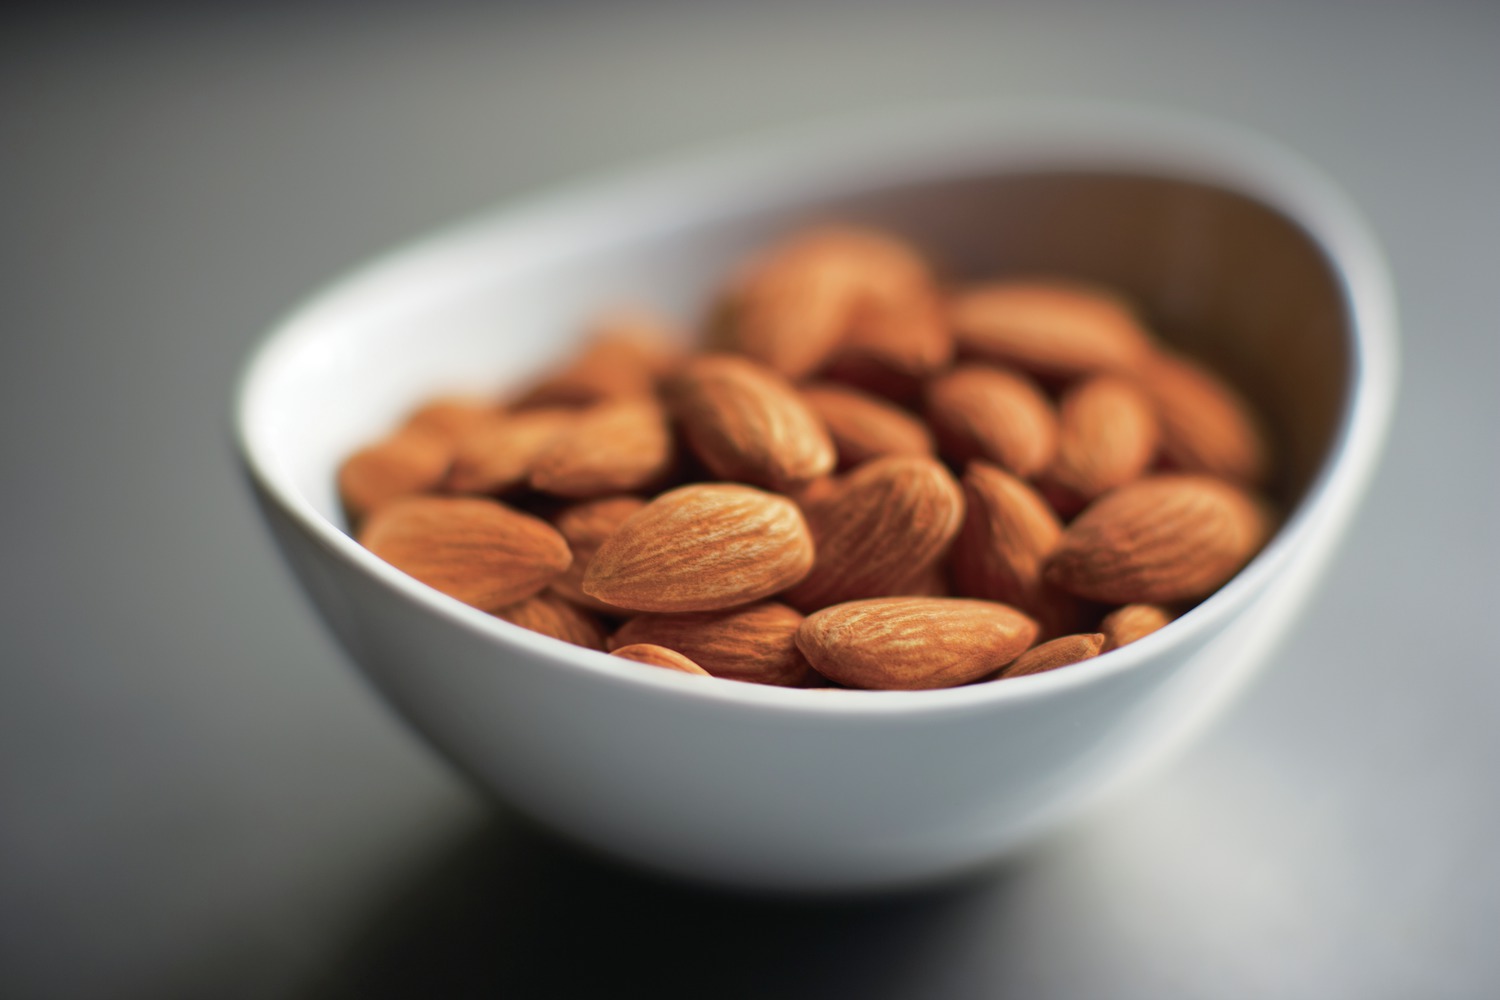 New Study Reveals Consuming Almonds Boost Post-Exercise Muscle Recovery and Performance